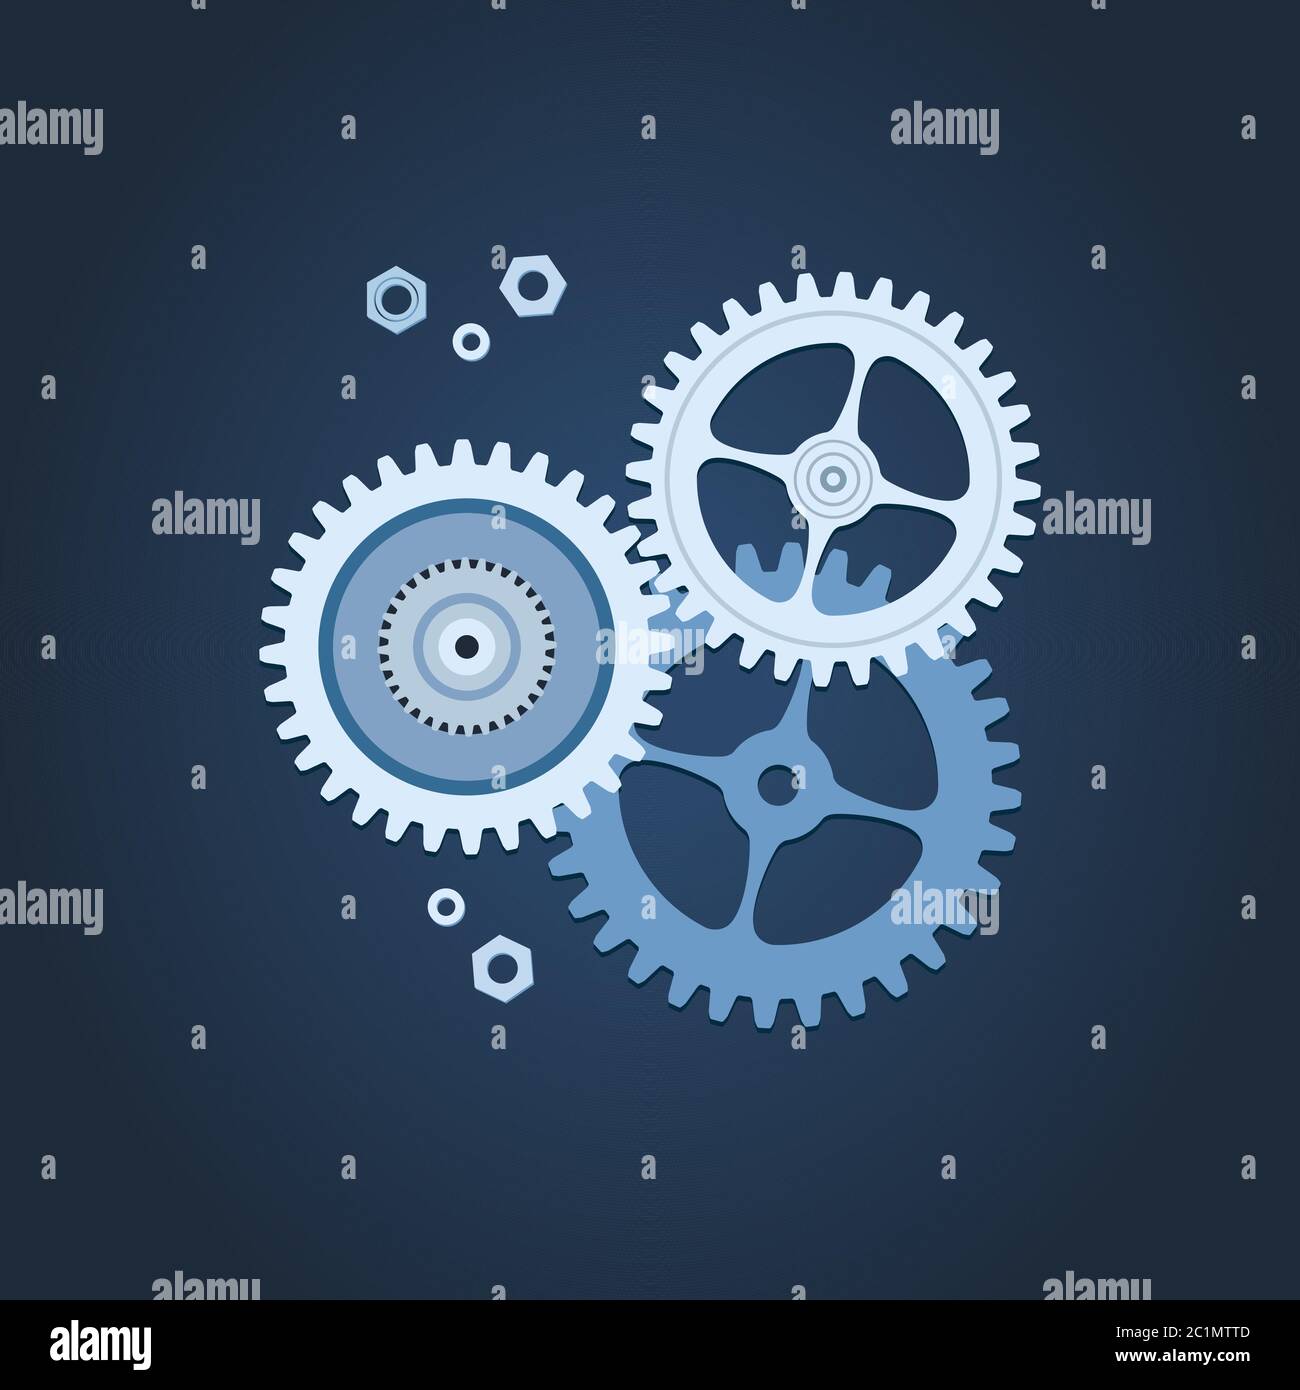 Simple icon from a series of working gear machines. Illustration of gear unit that works in harmony for a work process. Stock Vector